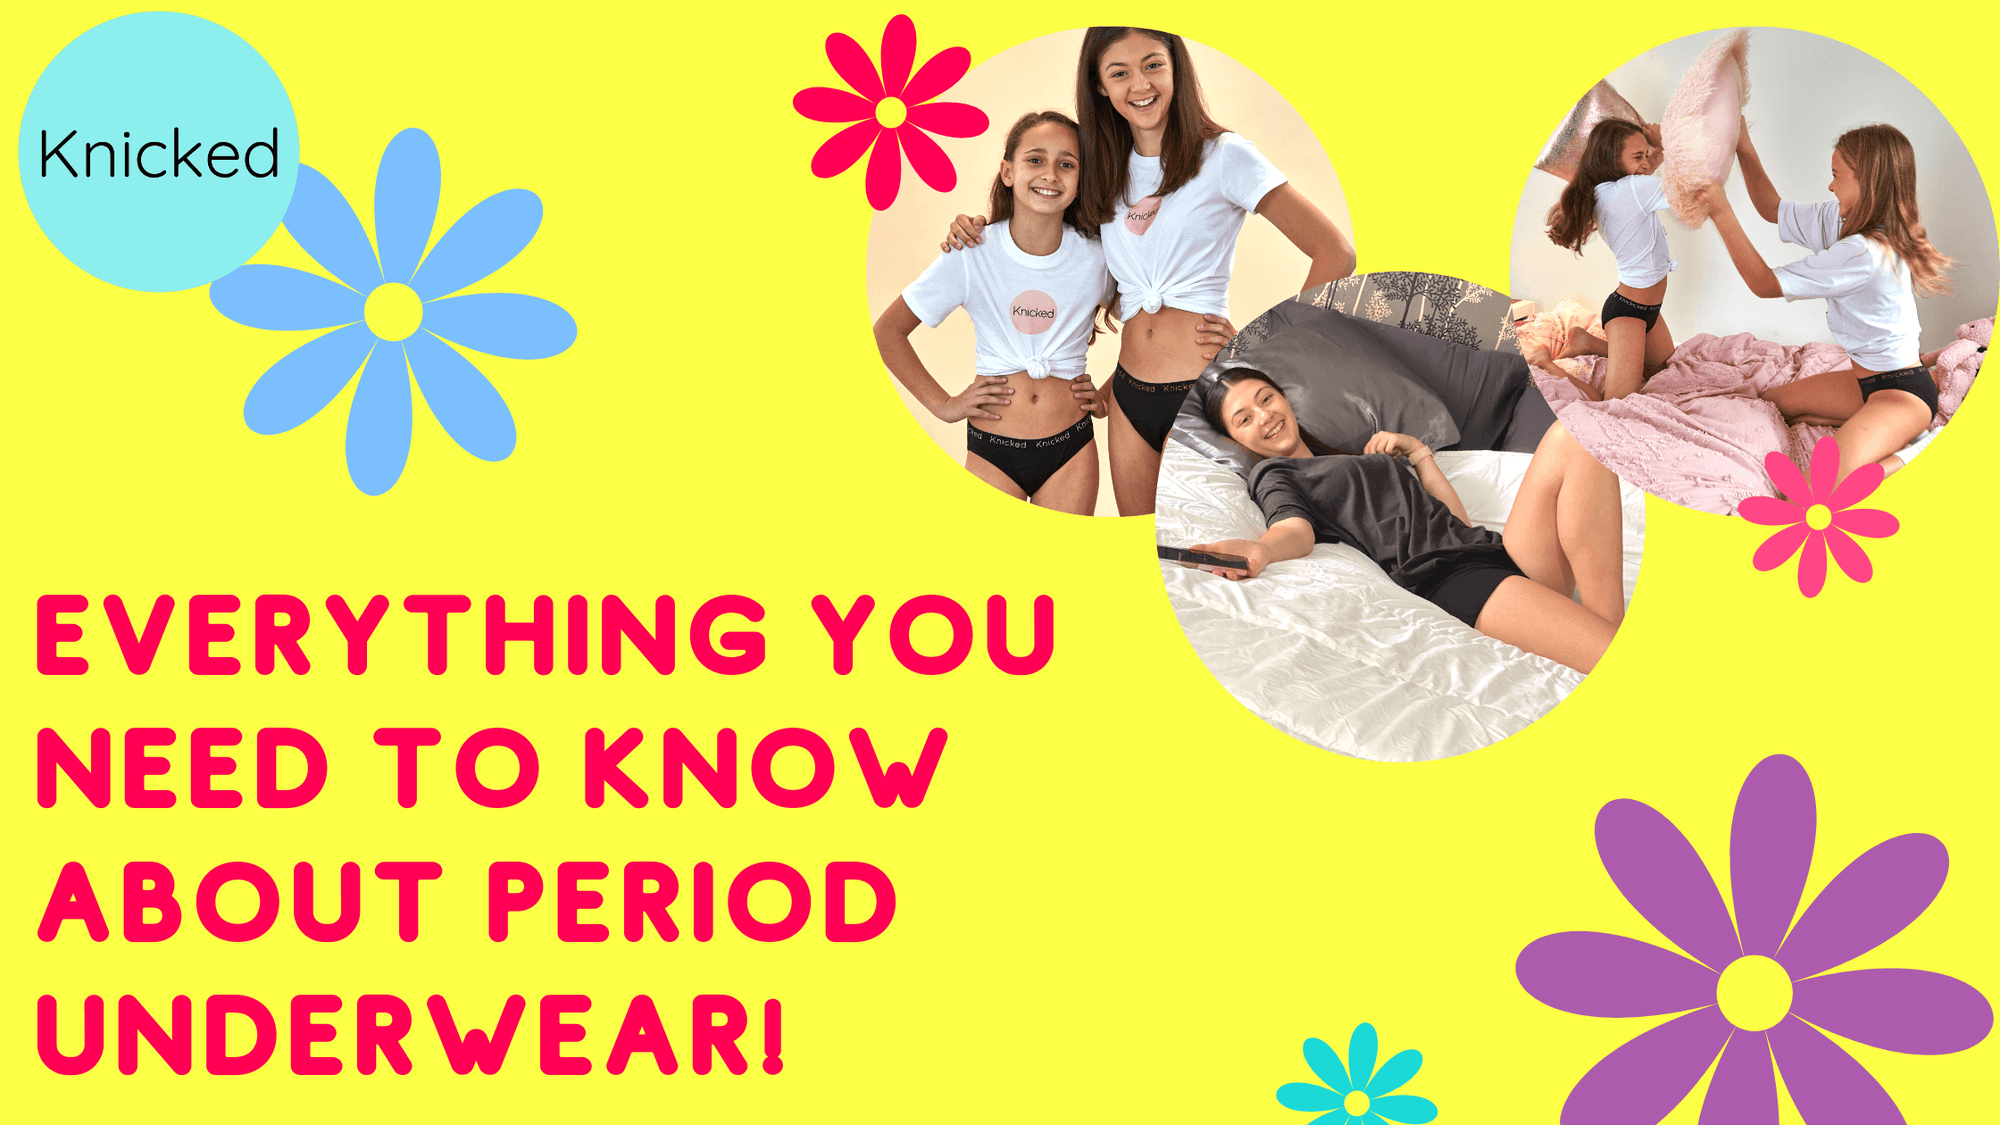 Let's talk about period toxicity  are our knickers safe